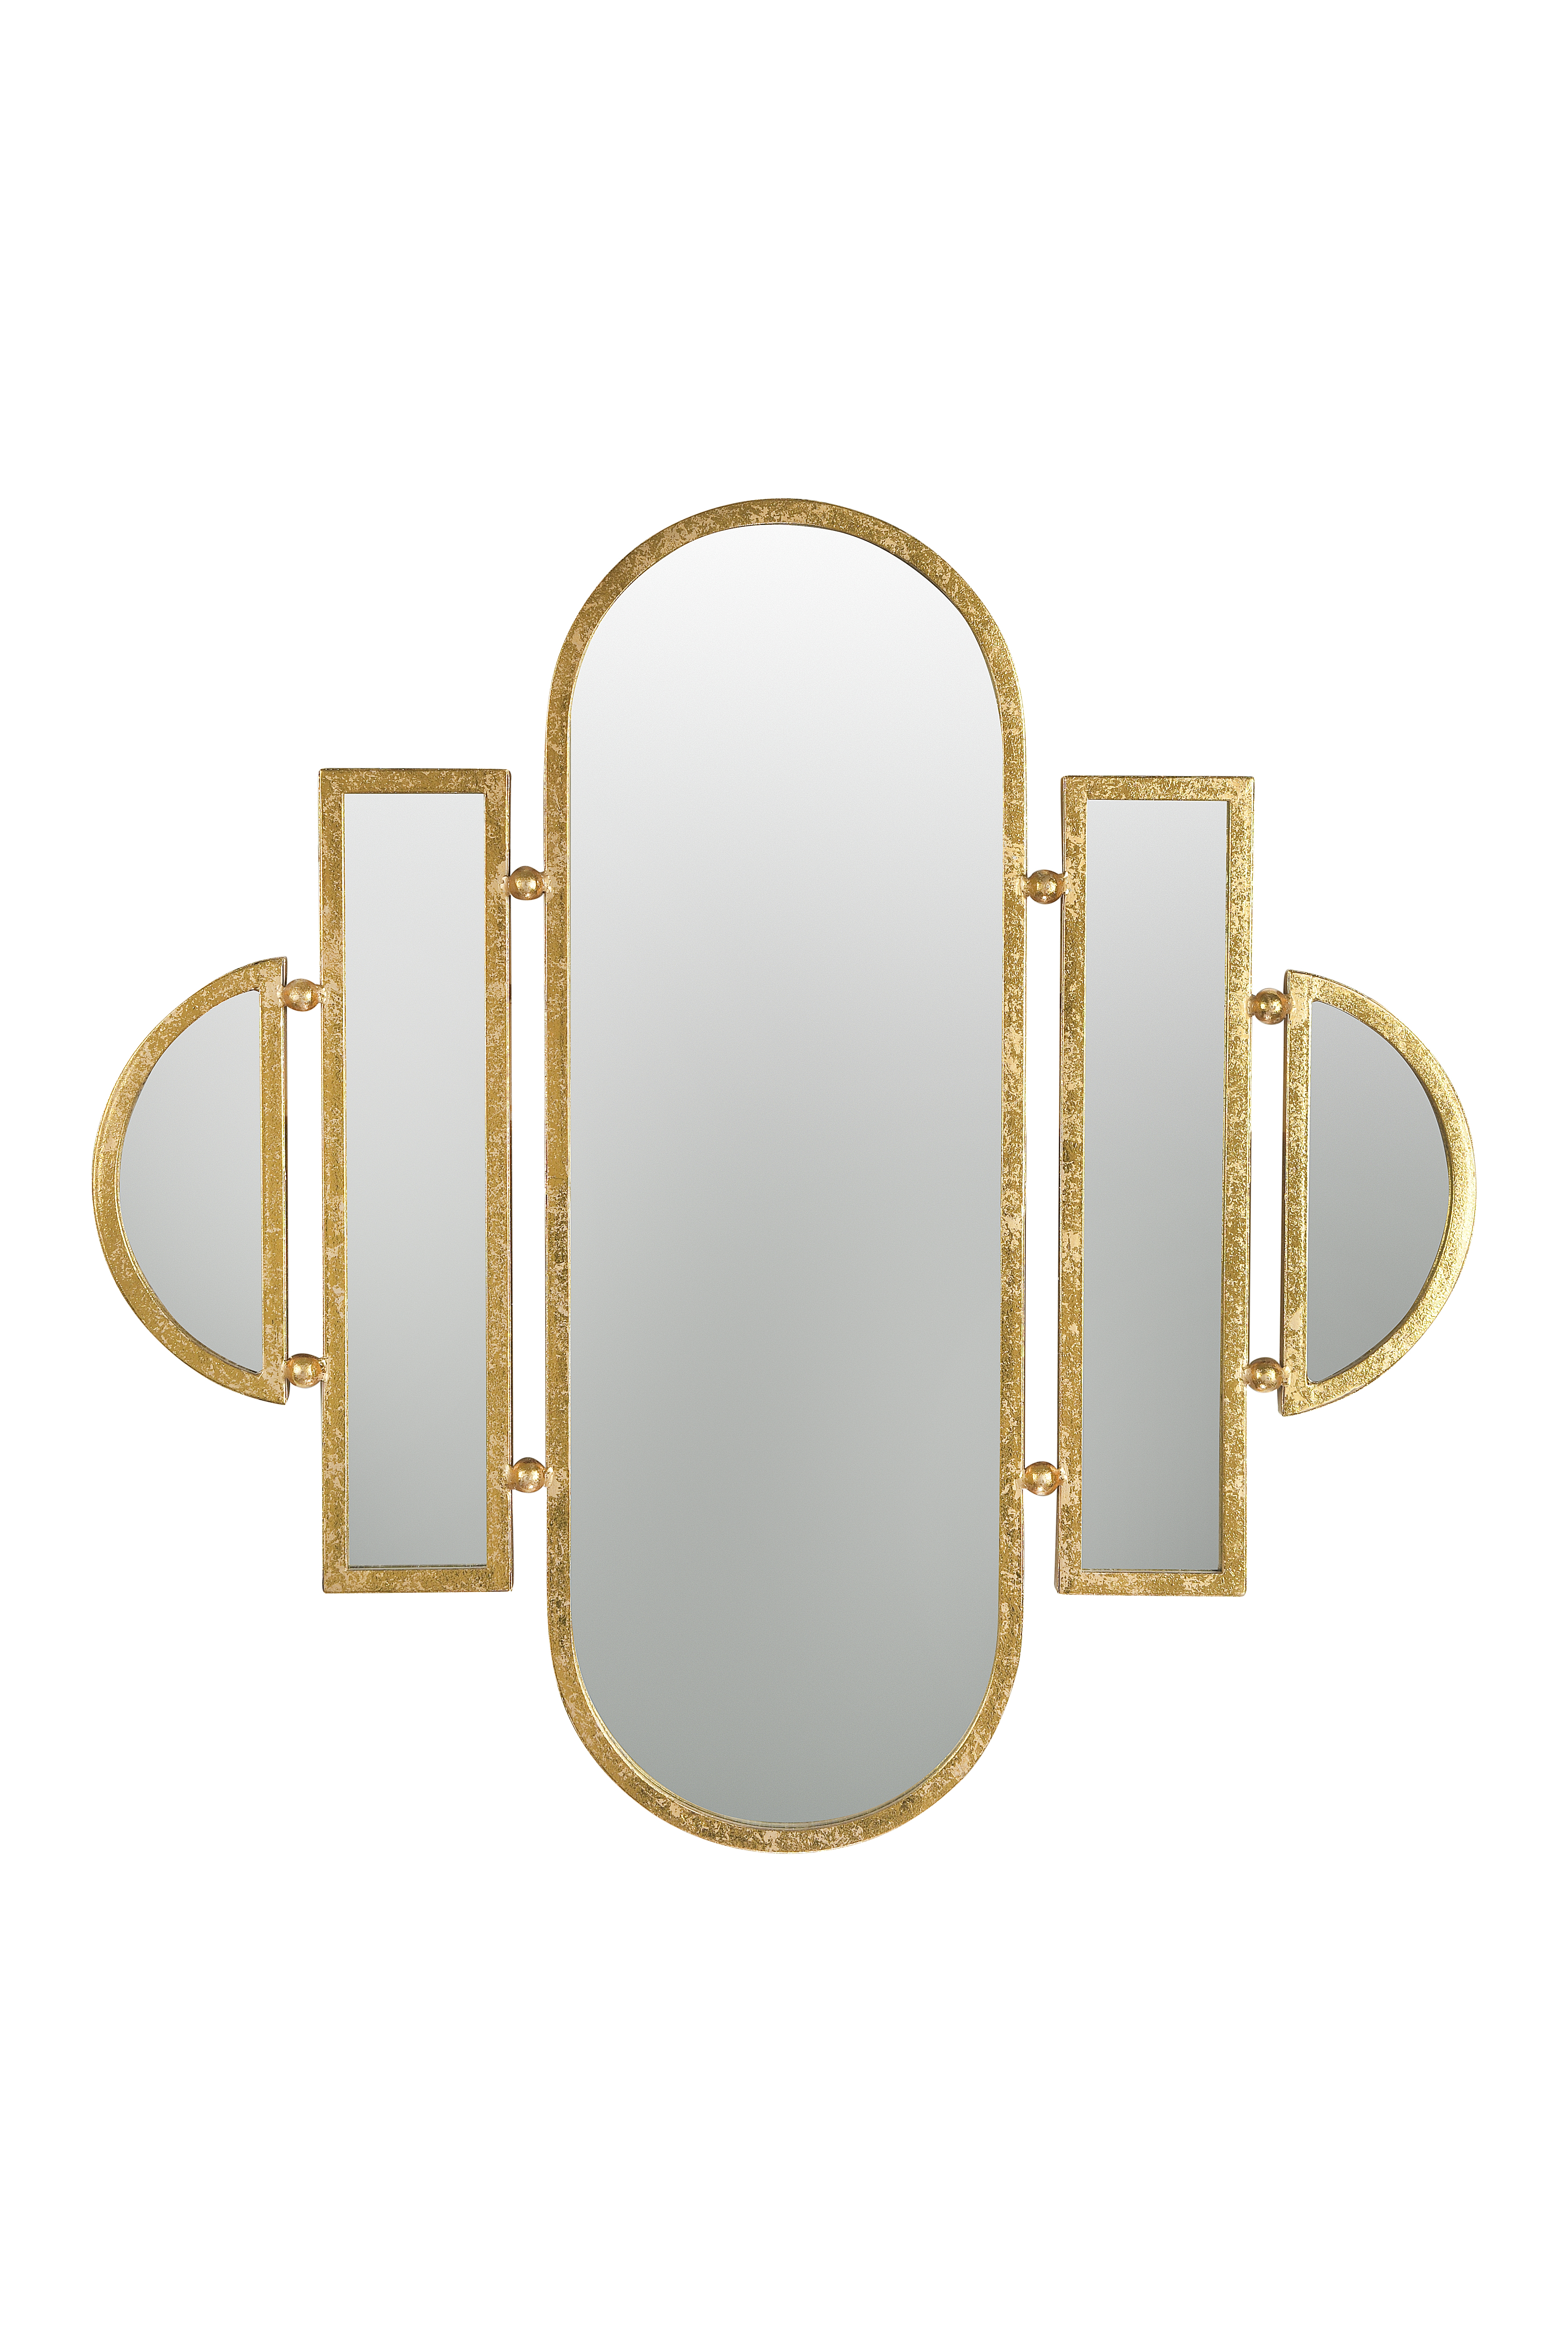 Art Deco 5-Part Wall Mirror With Gold Finish - Image 0